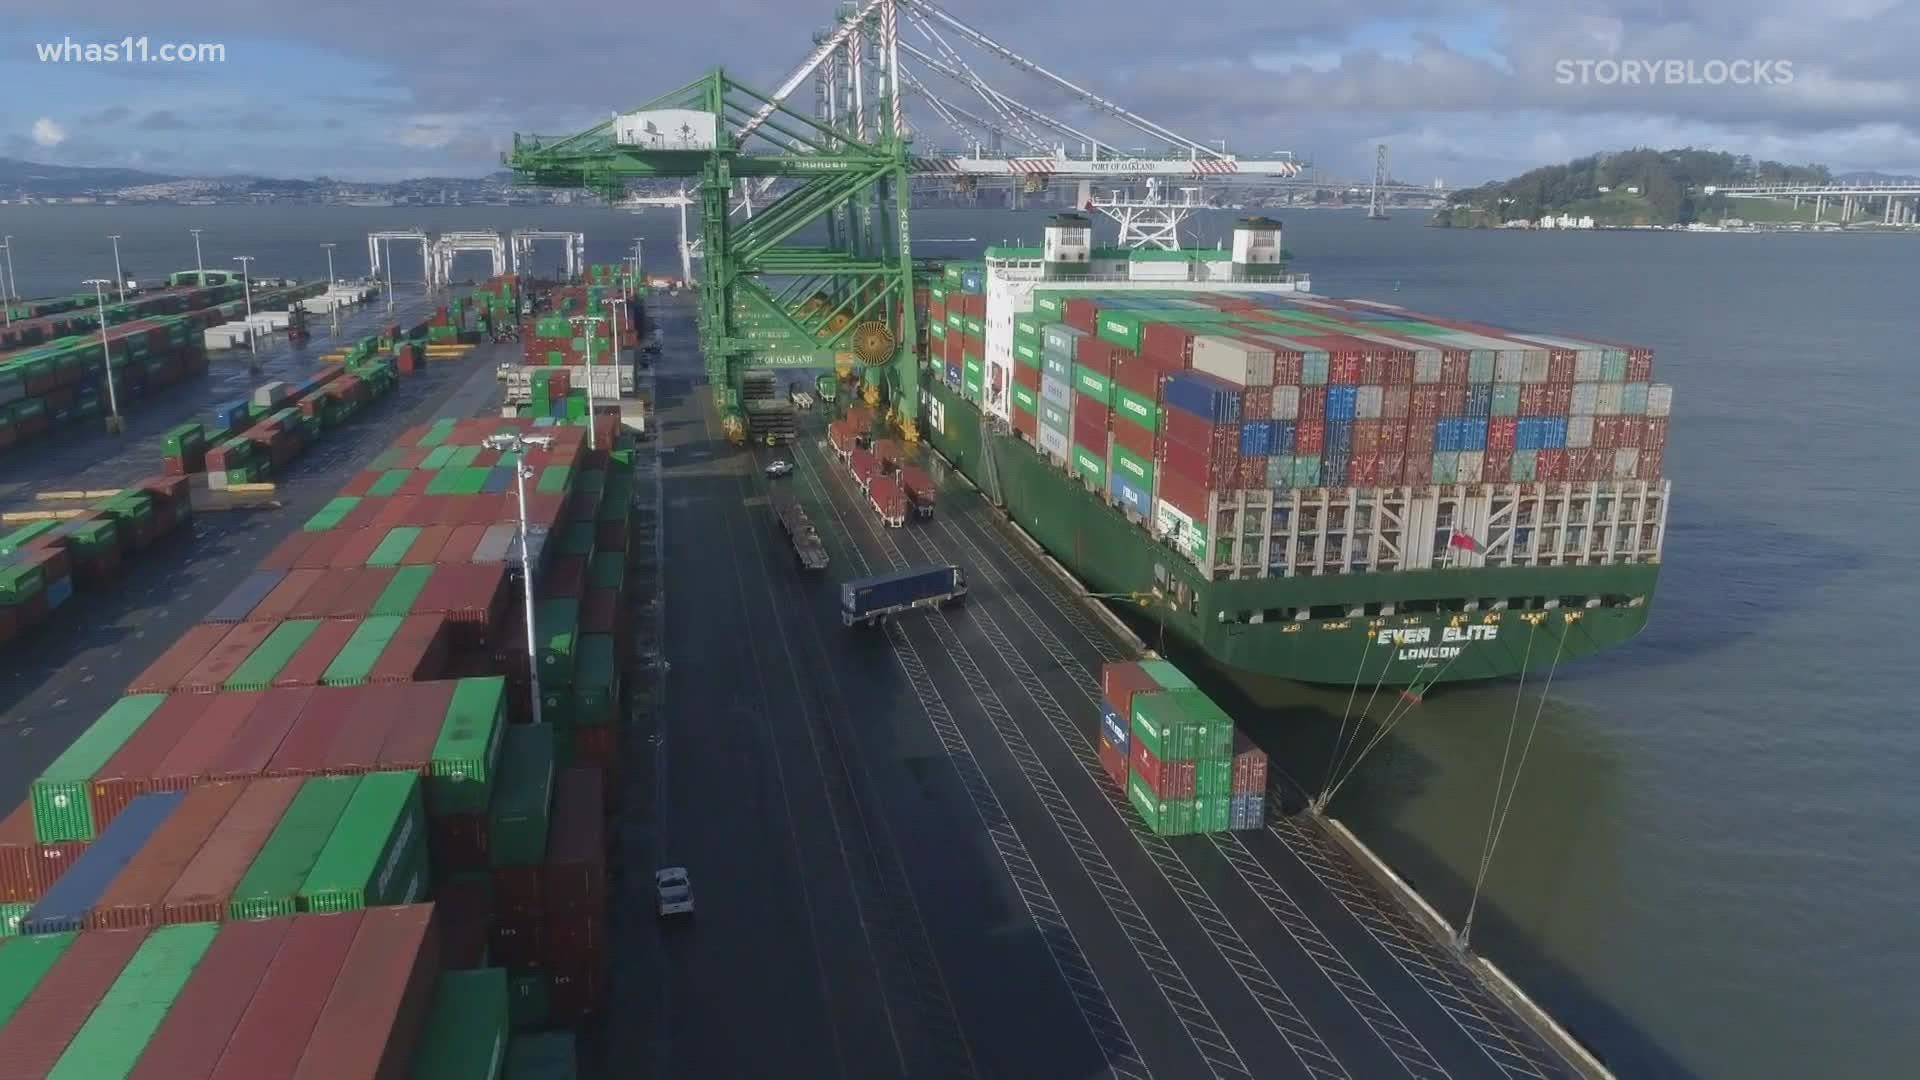 Increased volume moving through the ports has overwhelmed the supply chain across the board.